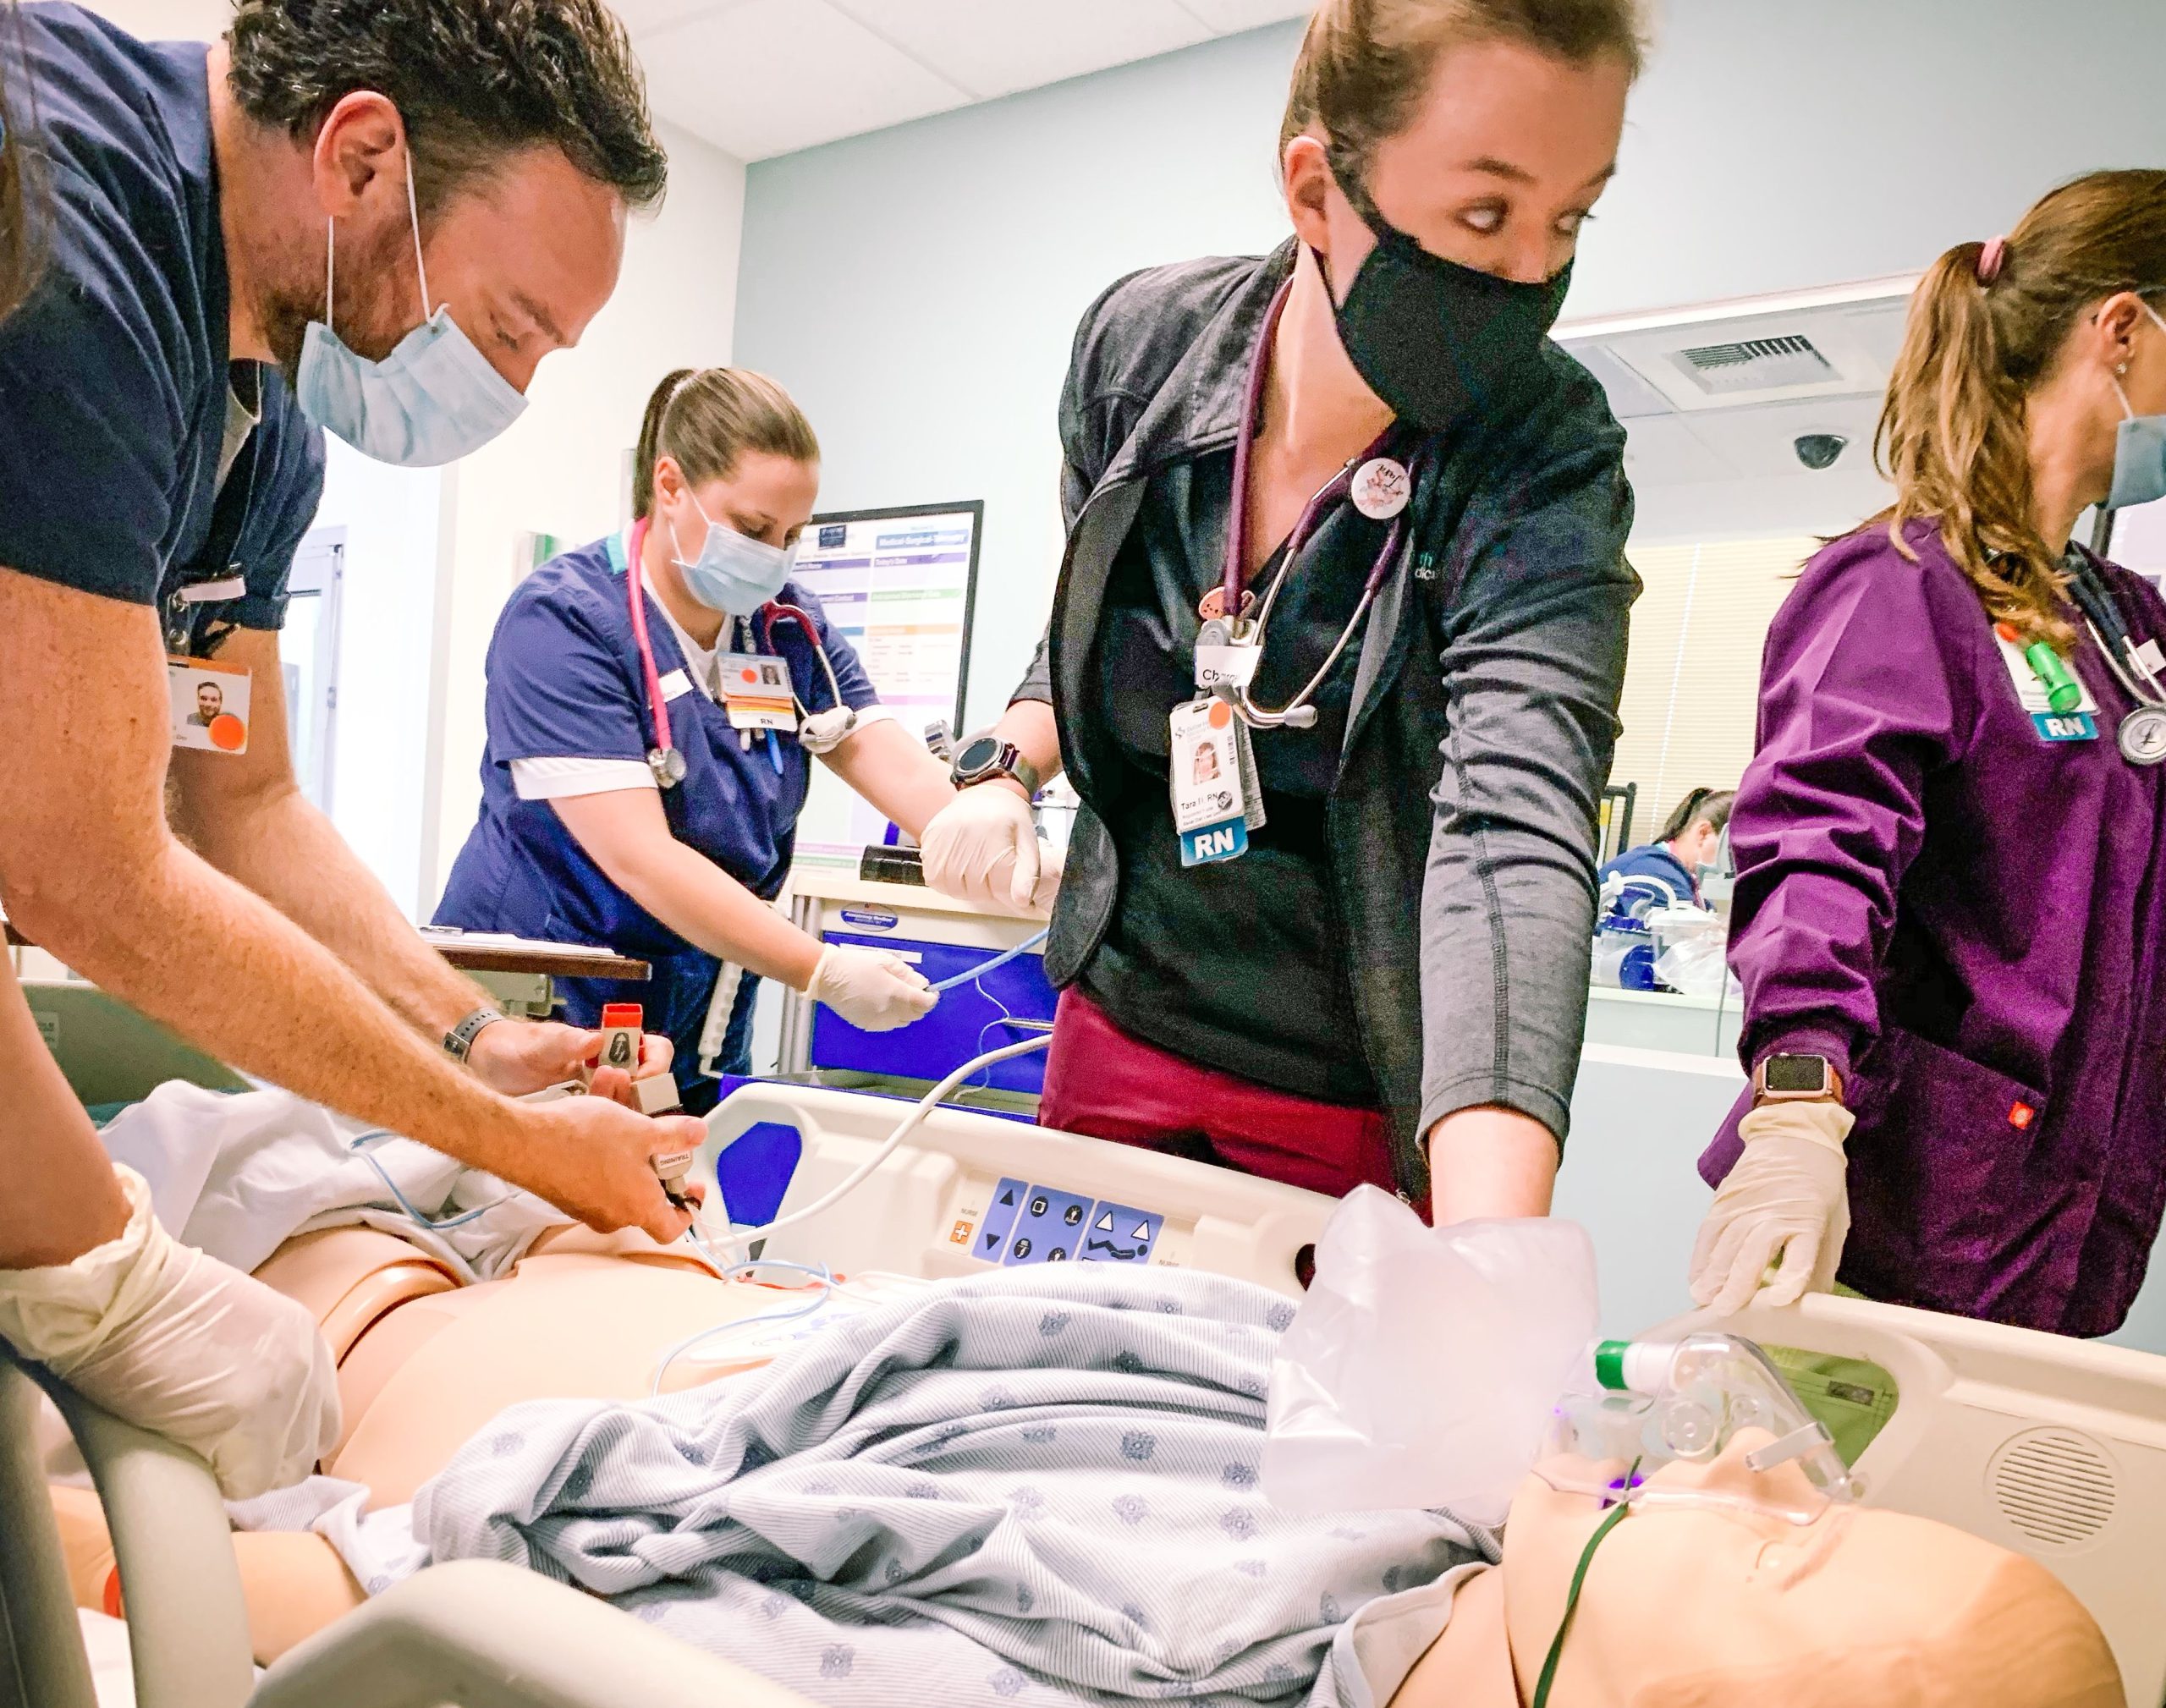 Sutter Health University Simulation Center trains healthcare workers of today, tomorrow